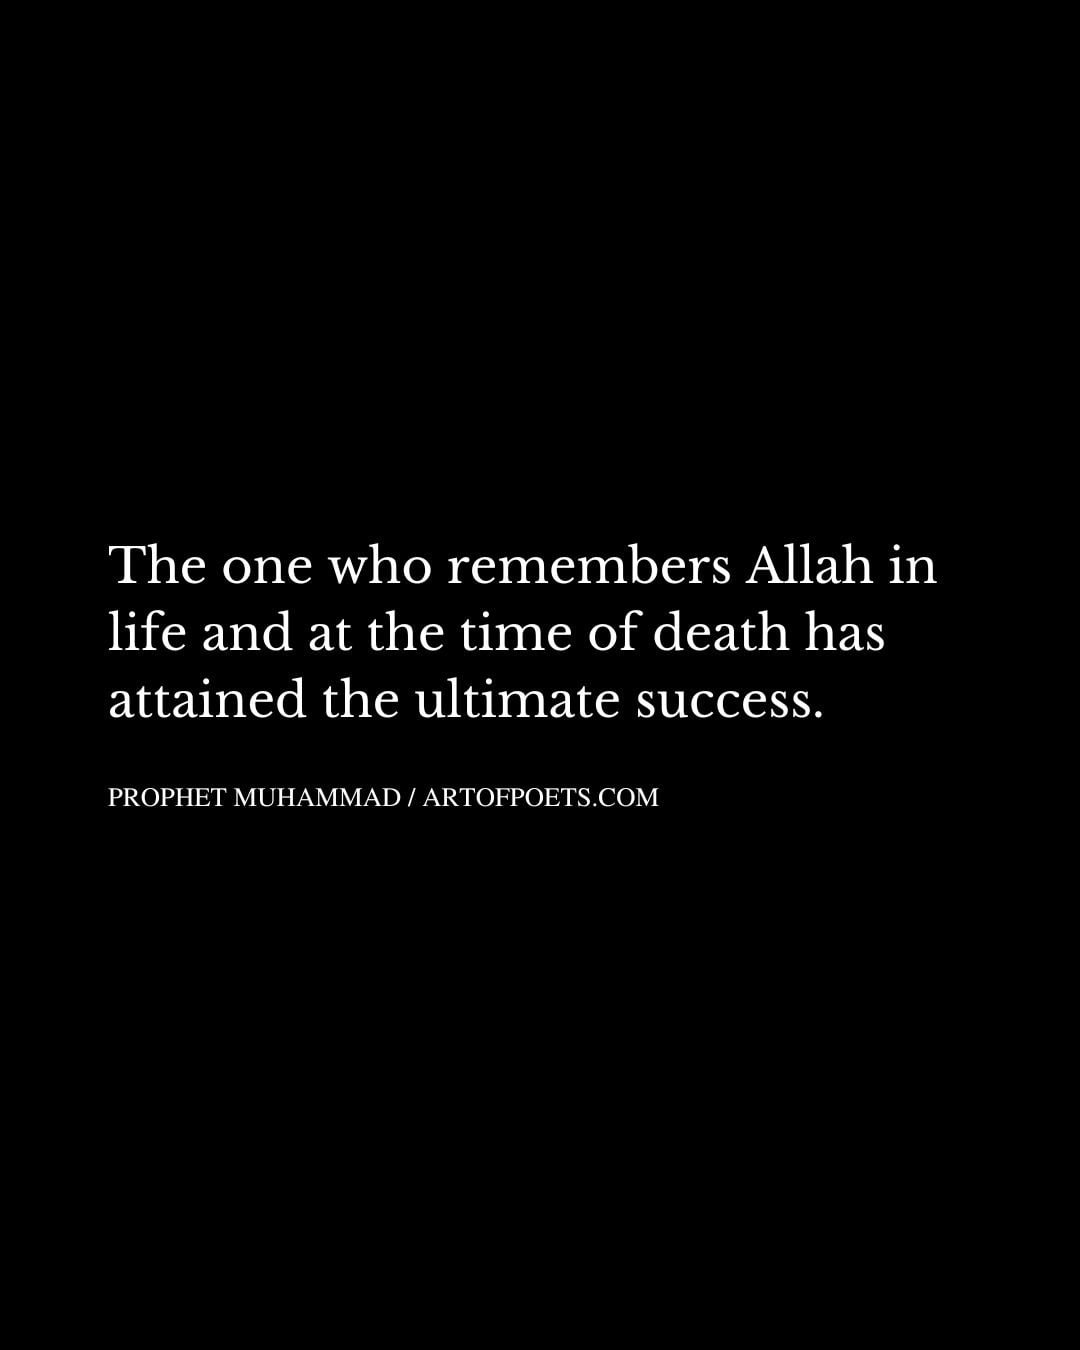 The one who remembers Allah in life and at the time of death has attained the ultimate success